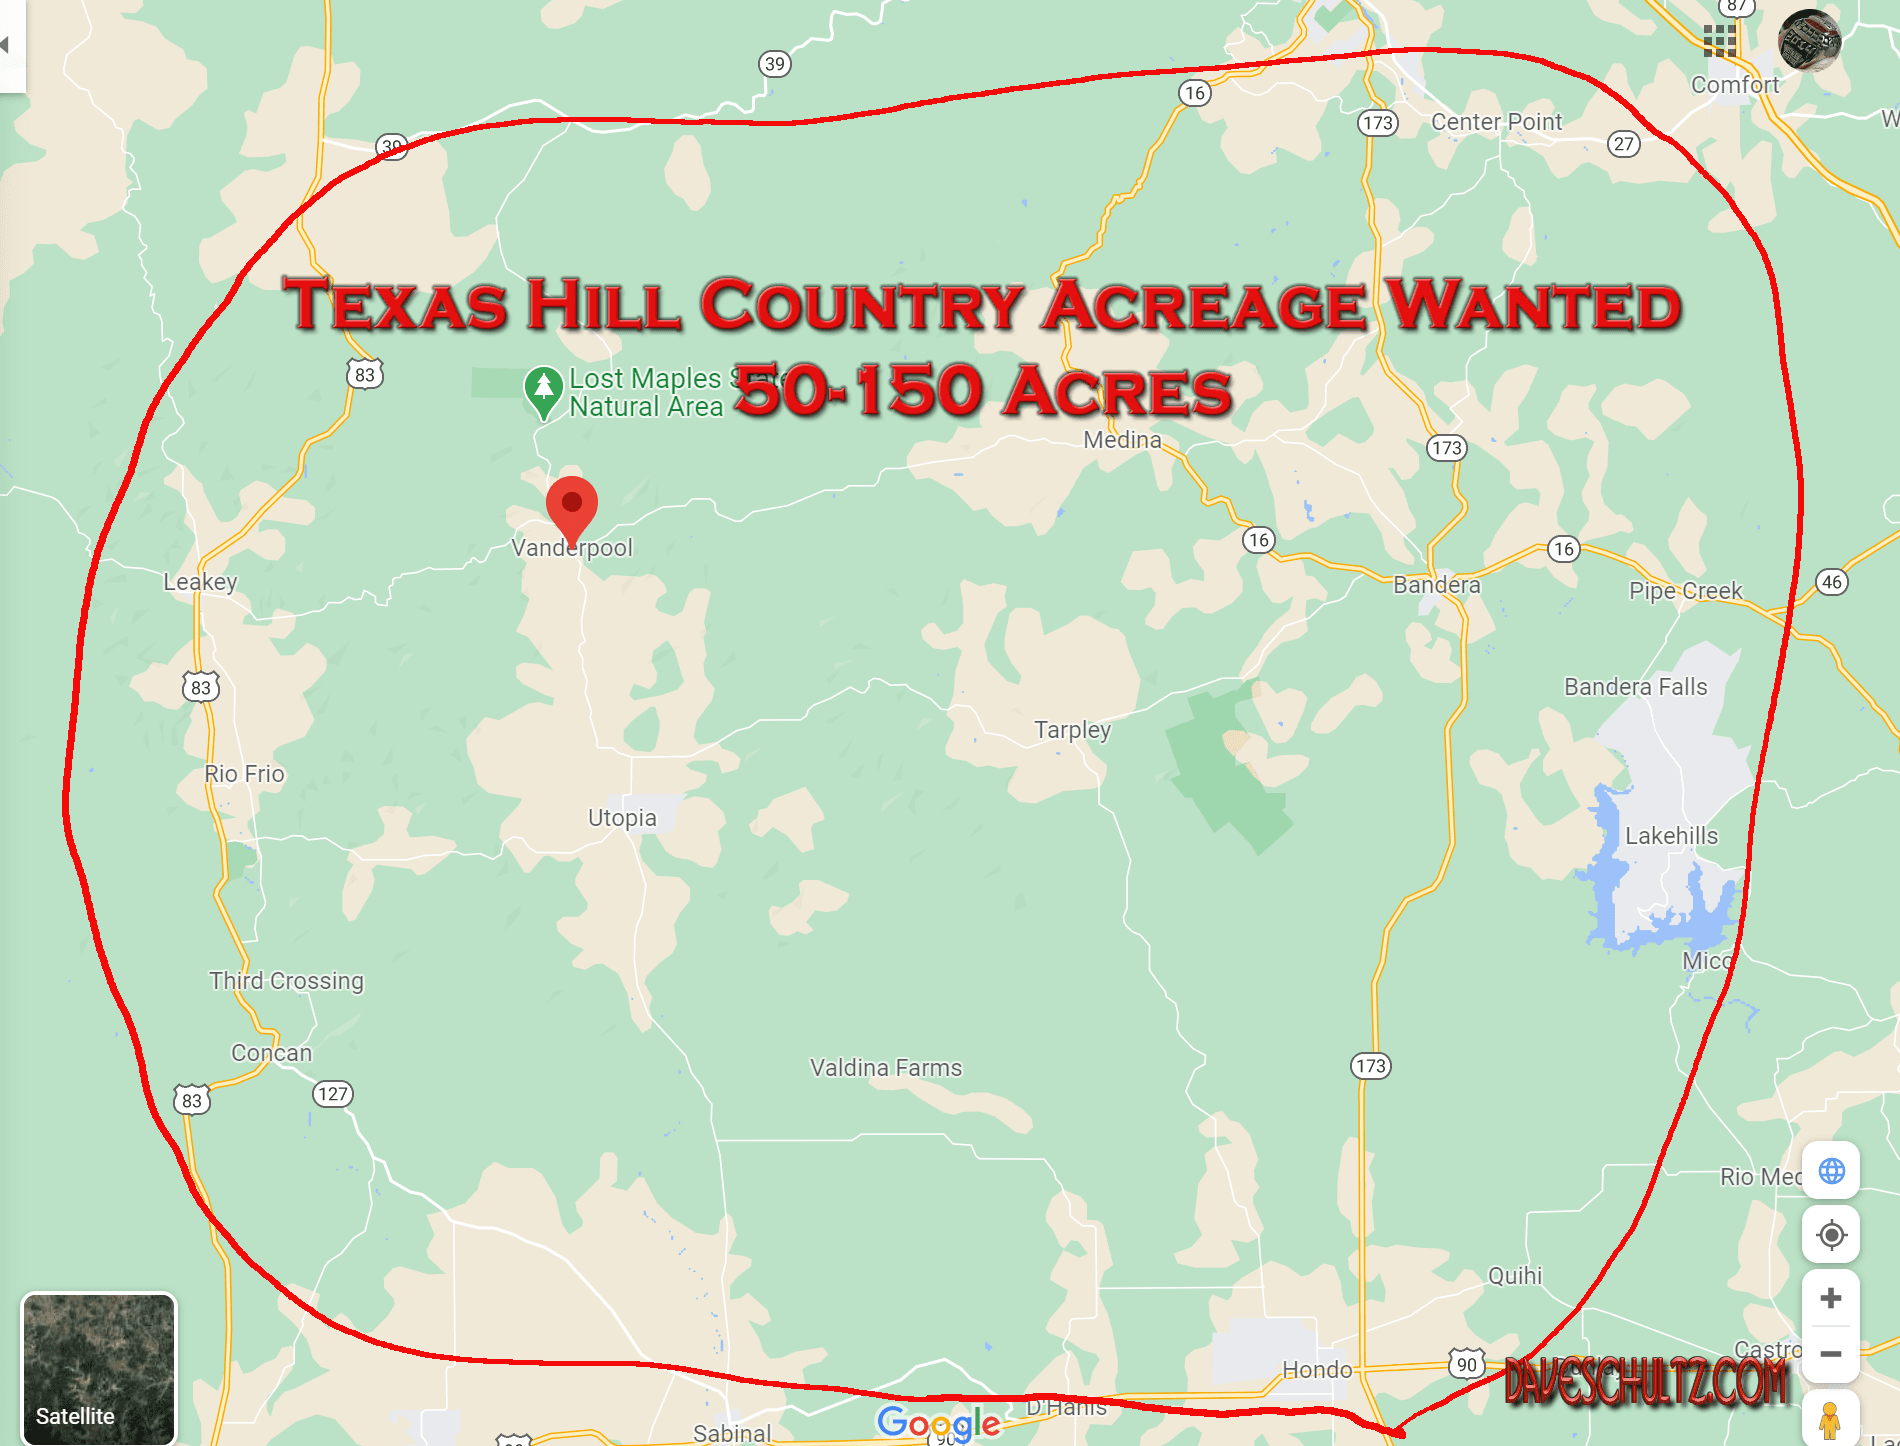 Texas Hill Country Land Wanted